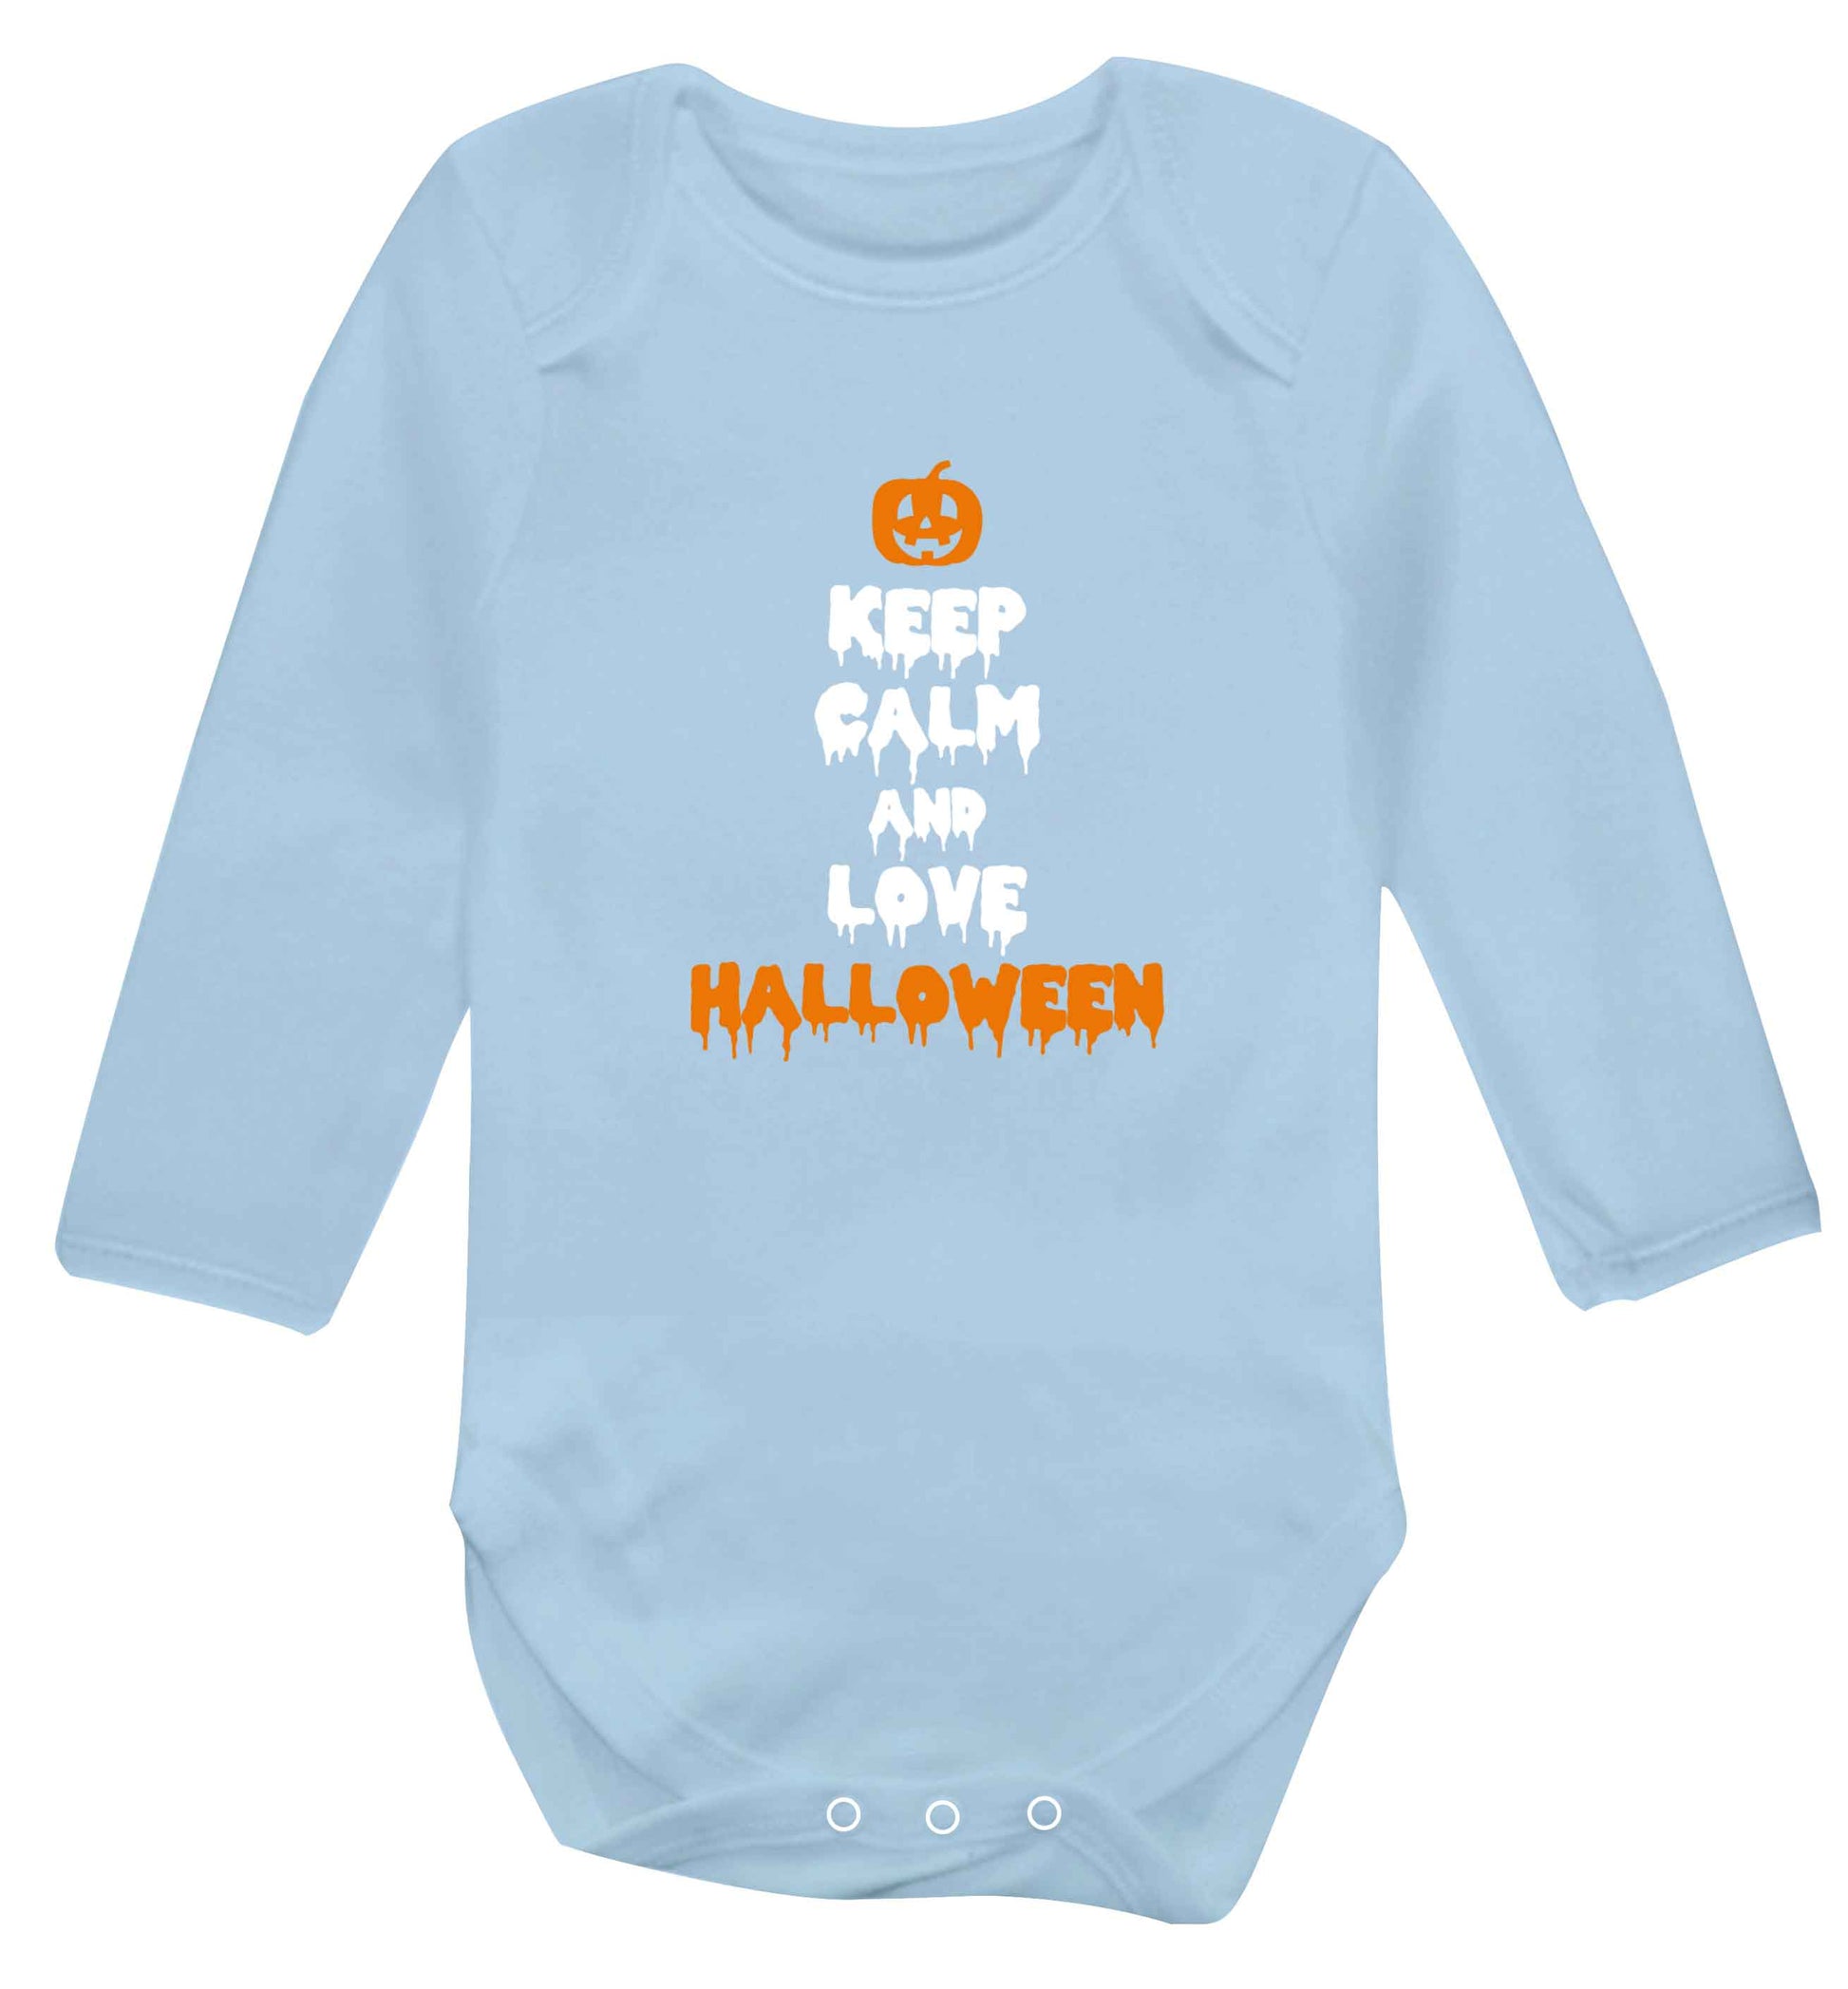 Keep calm and love halloween baby vest long sleeved pale blue 6-12 months